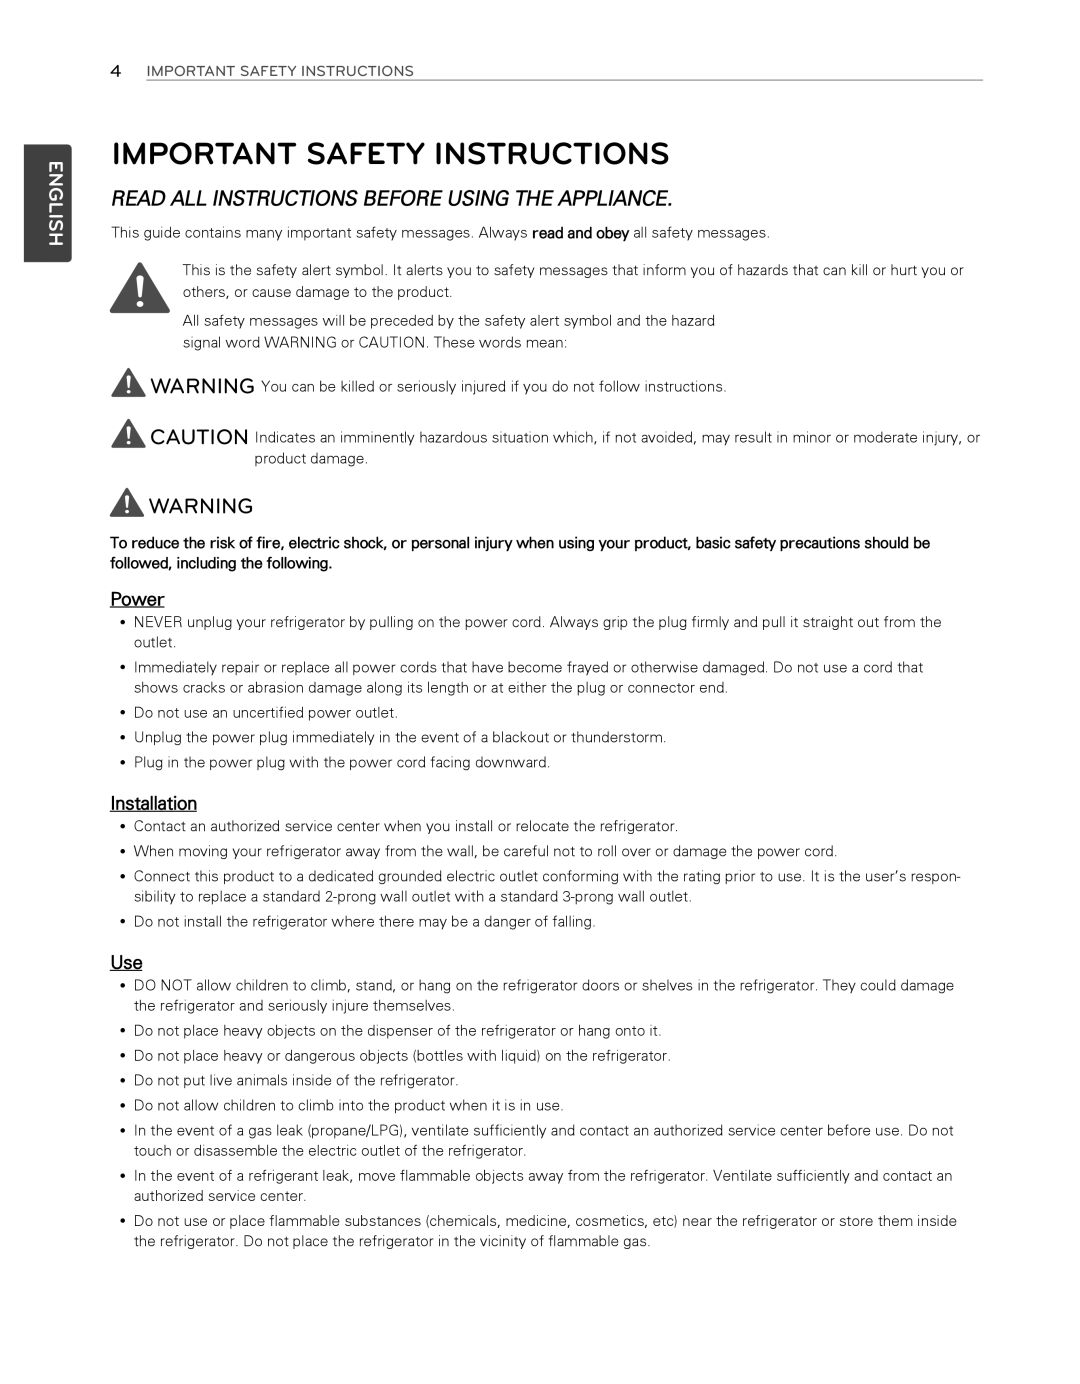 LG Electronics LFX25974SB Important Safety Instructions, English, Read All Instructions Before Using The Appliance, Power 